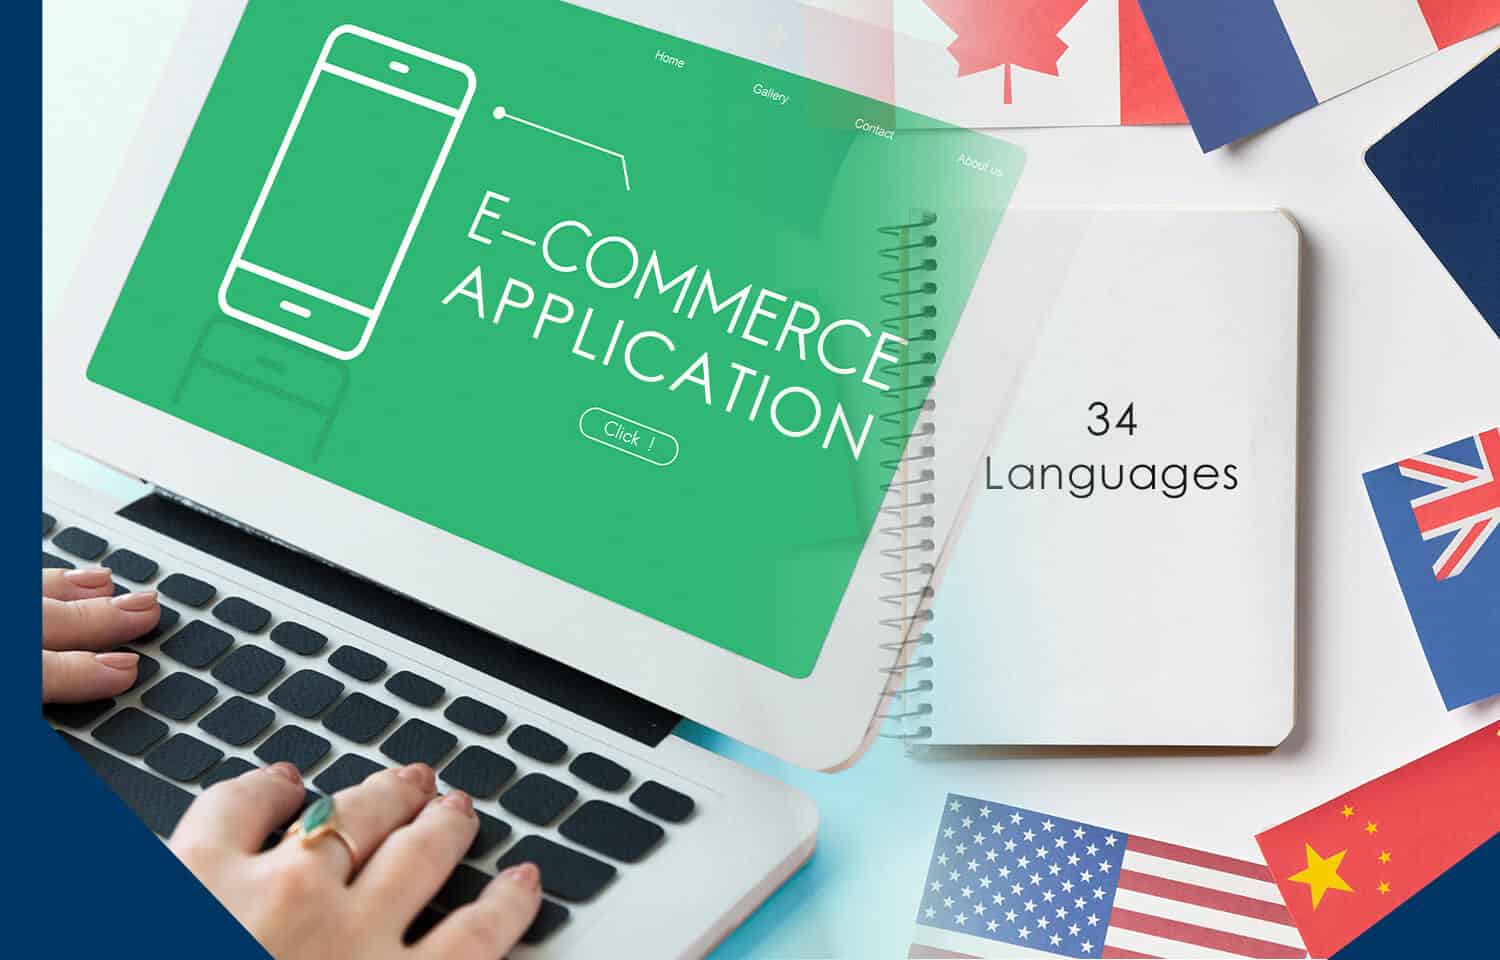 localization of an e commerce application into 34 languages